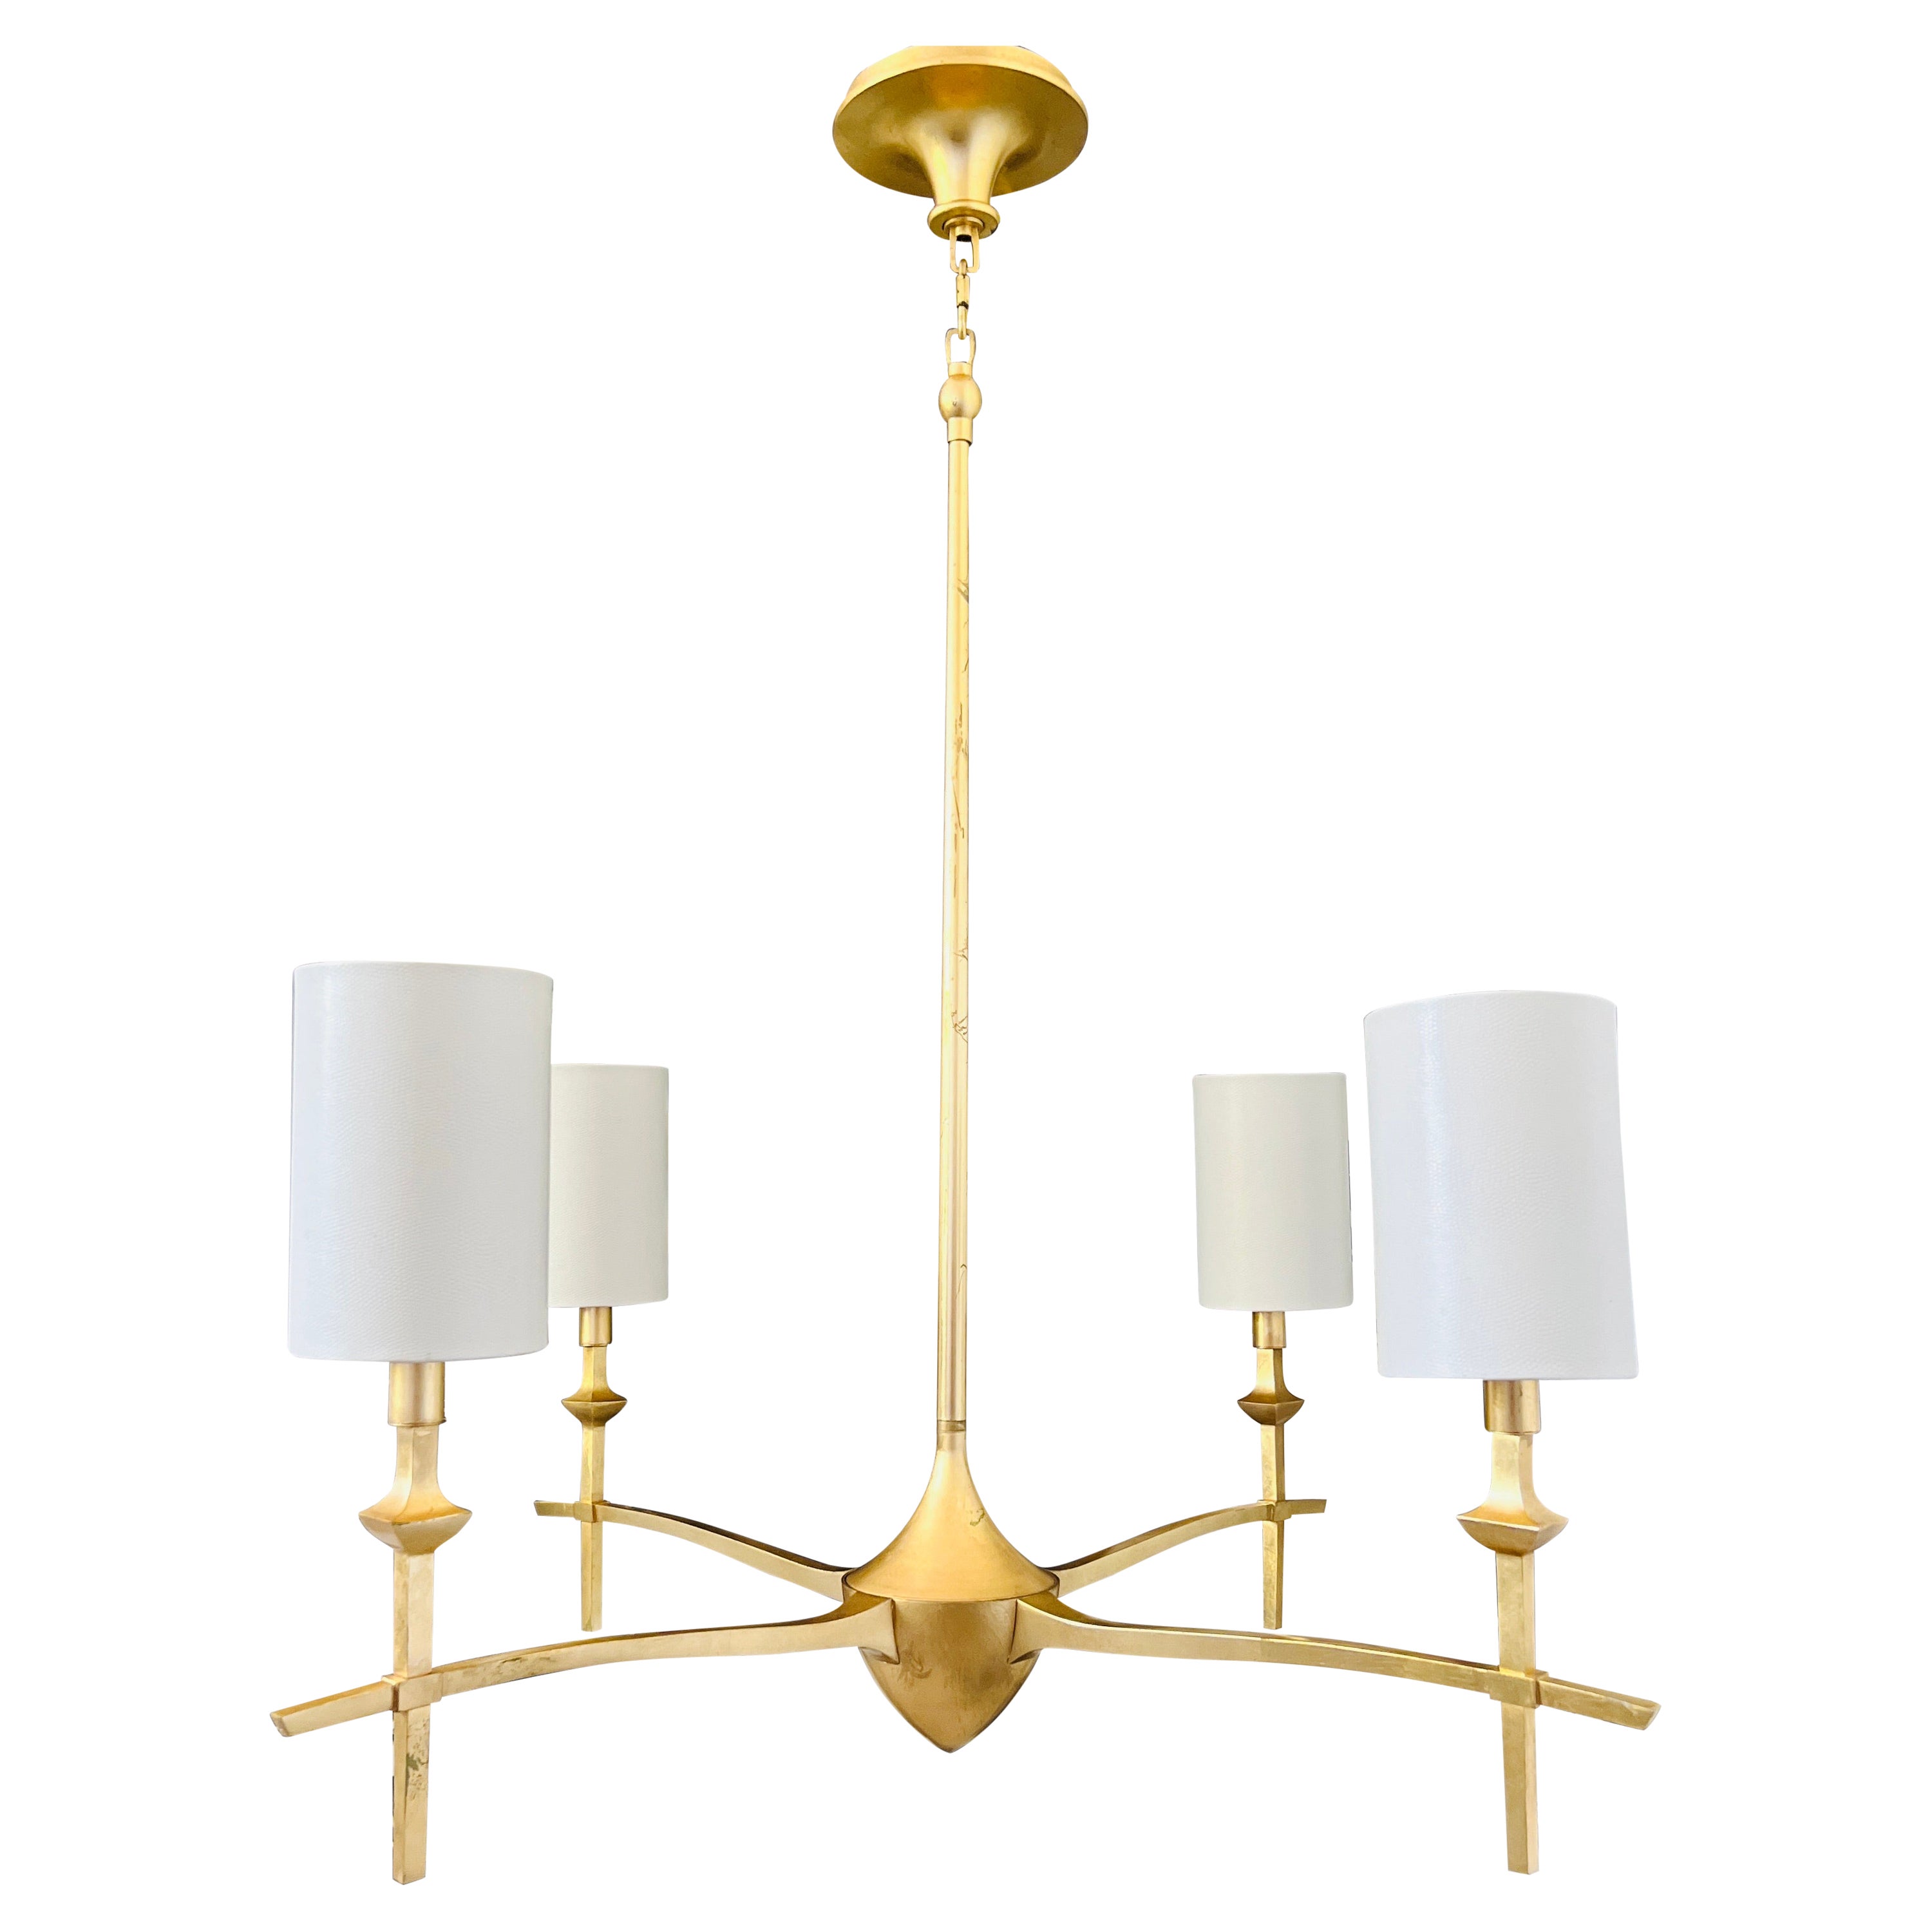 Contemporary Gilt Iron Chandelier with Four Arm Design For Sale